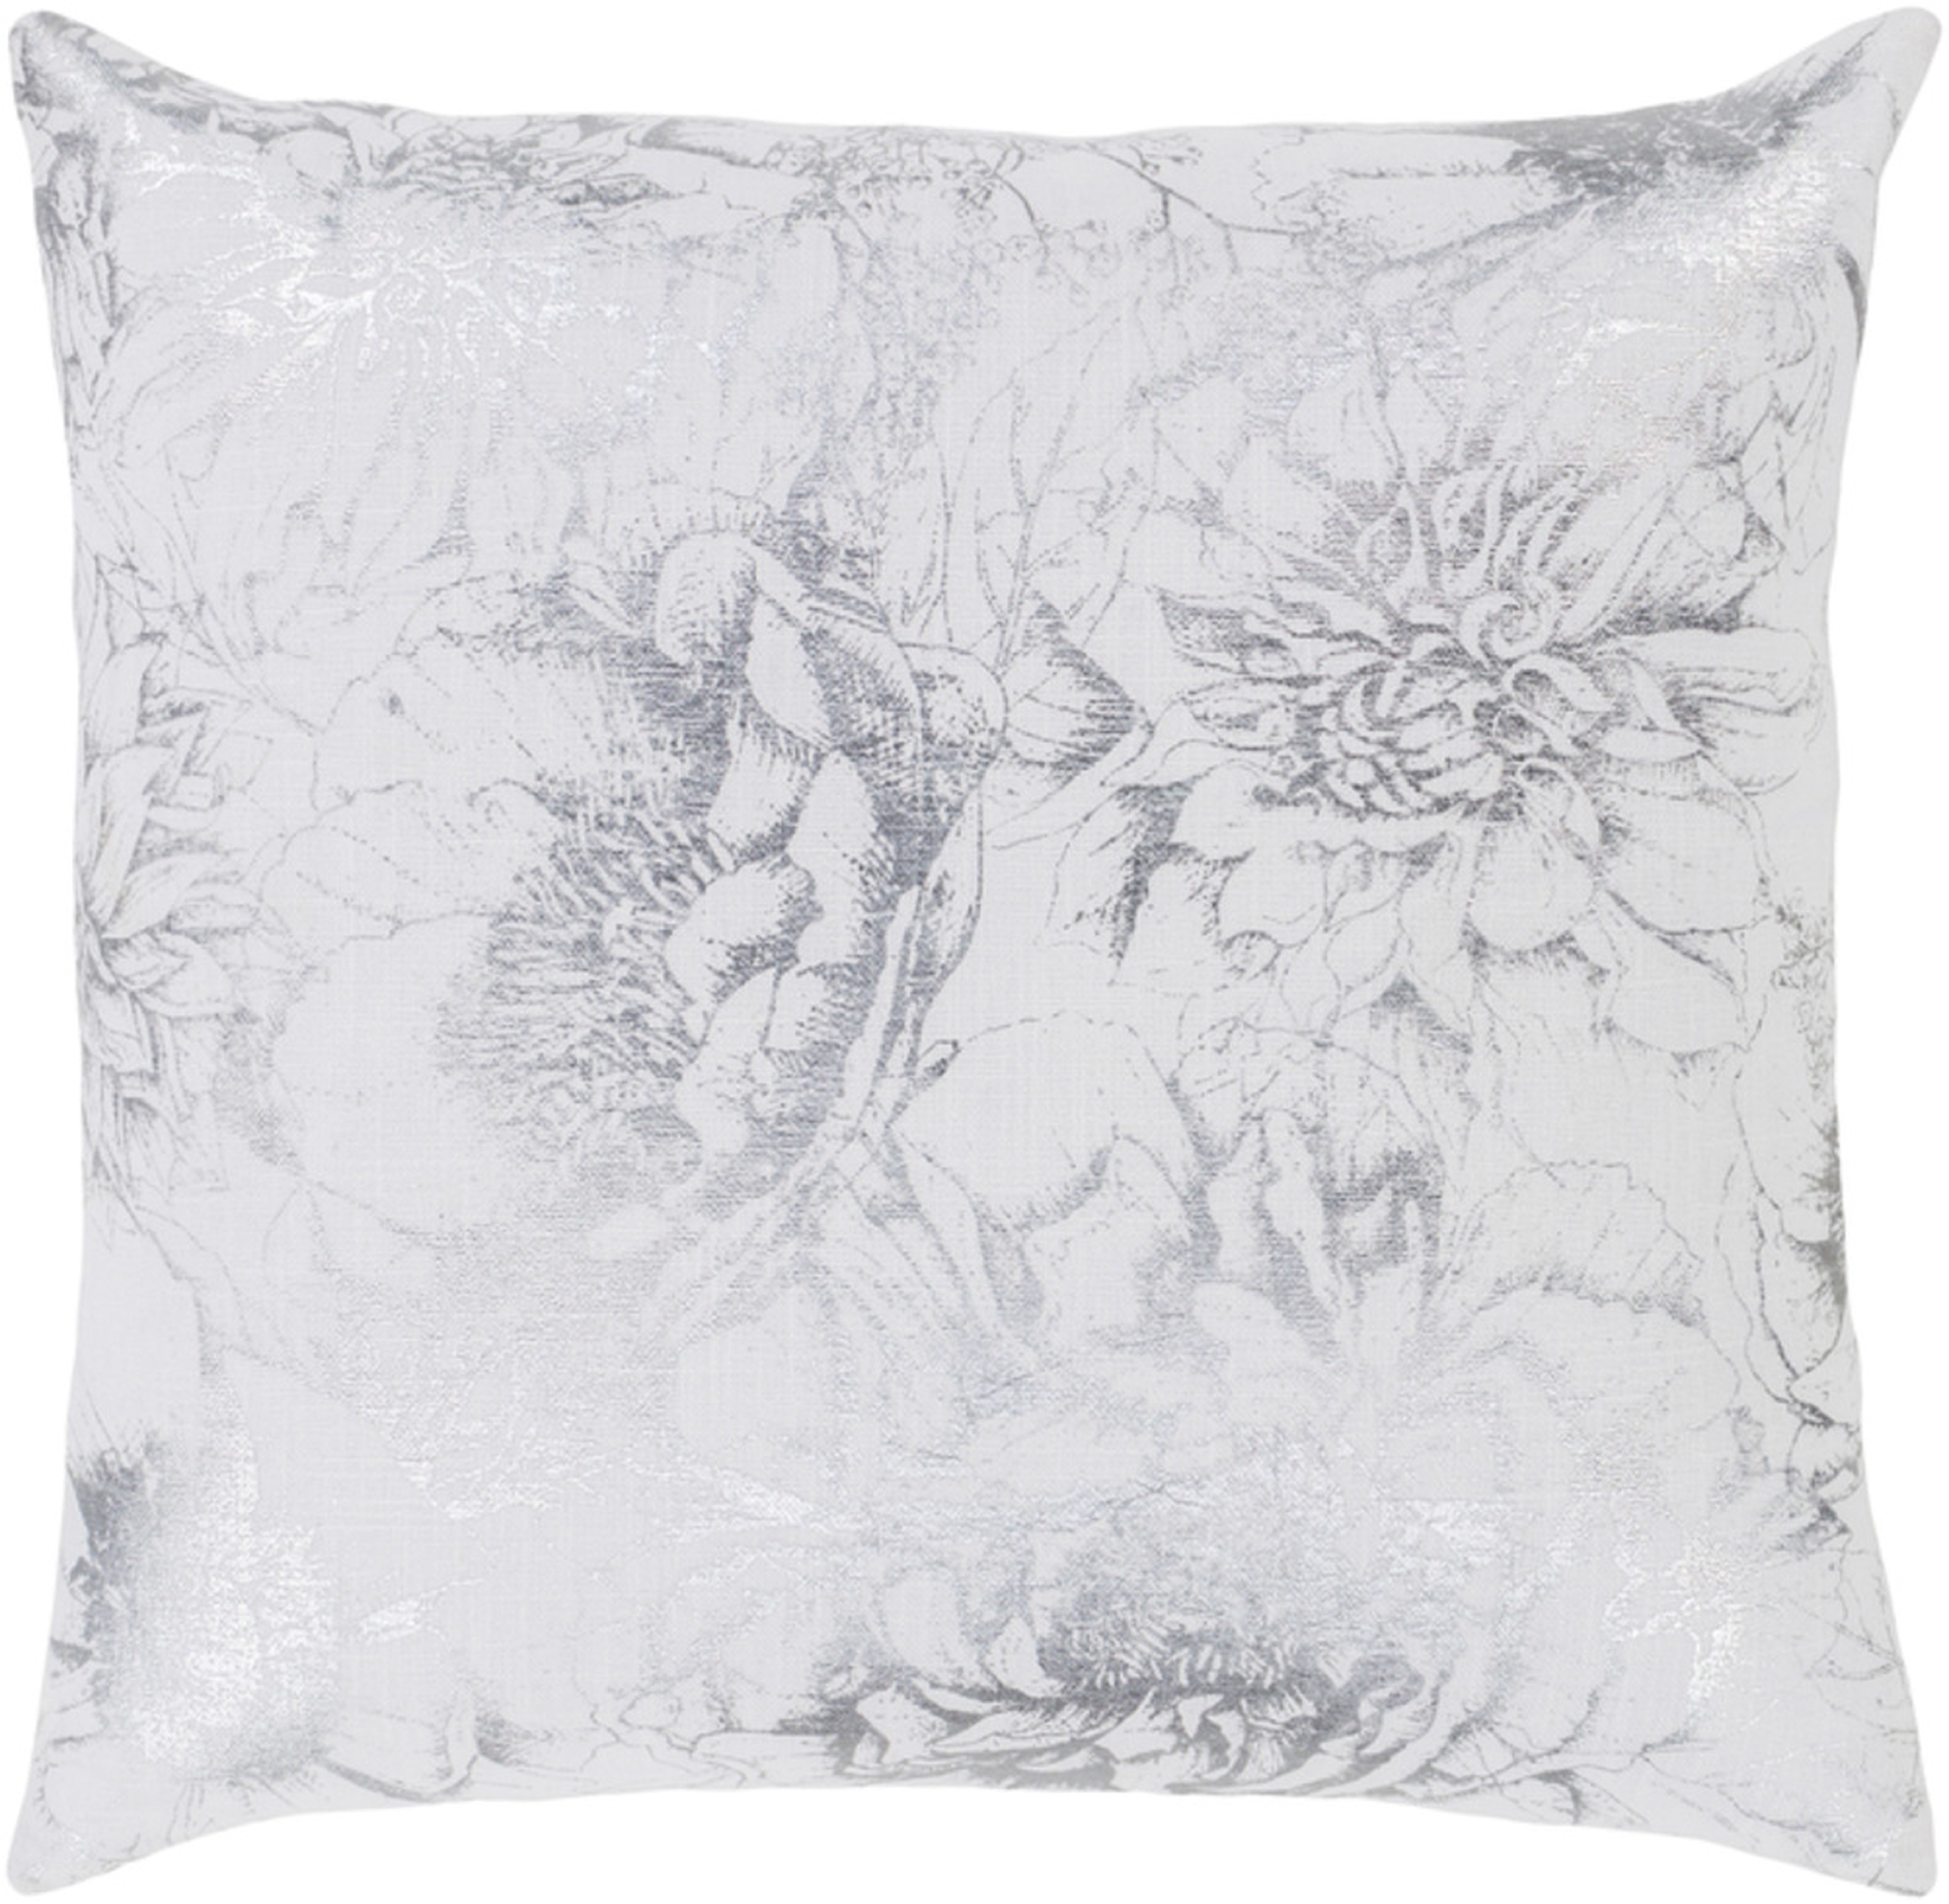 Crescent - CSC-013 - 22" x 22" - pillow cover only - Surya